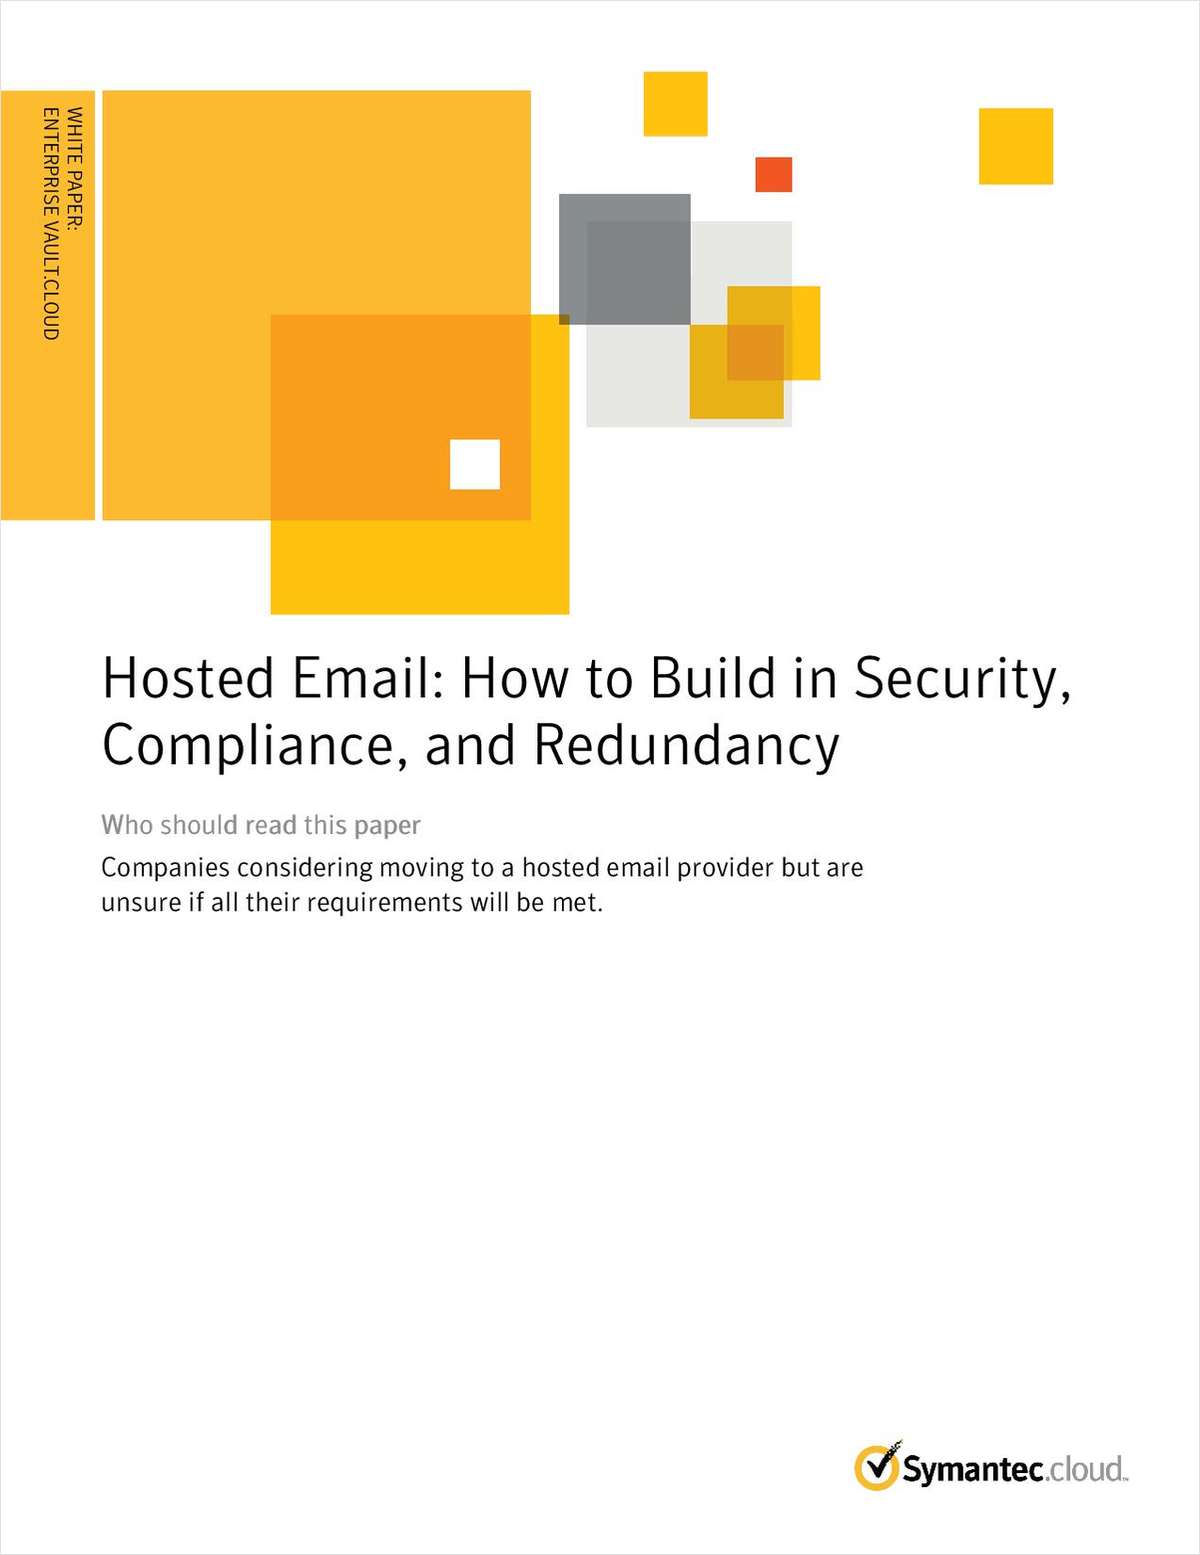 Hosted Email: How to Build in Security, Compliance, and Redundancy